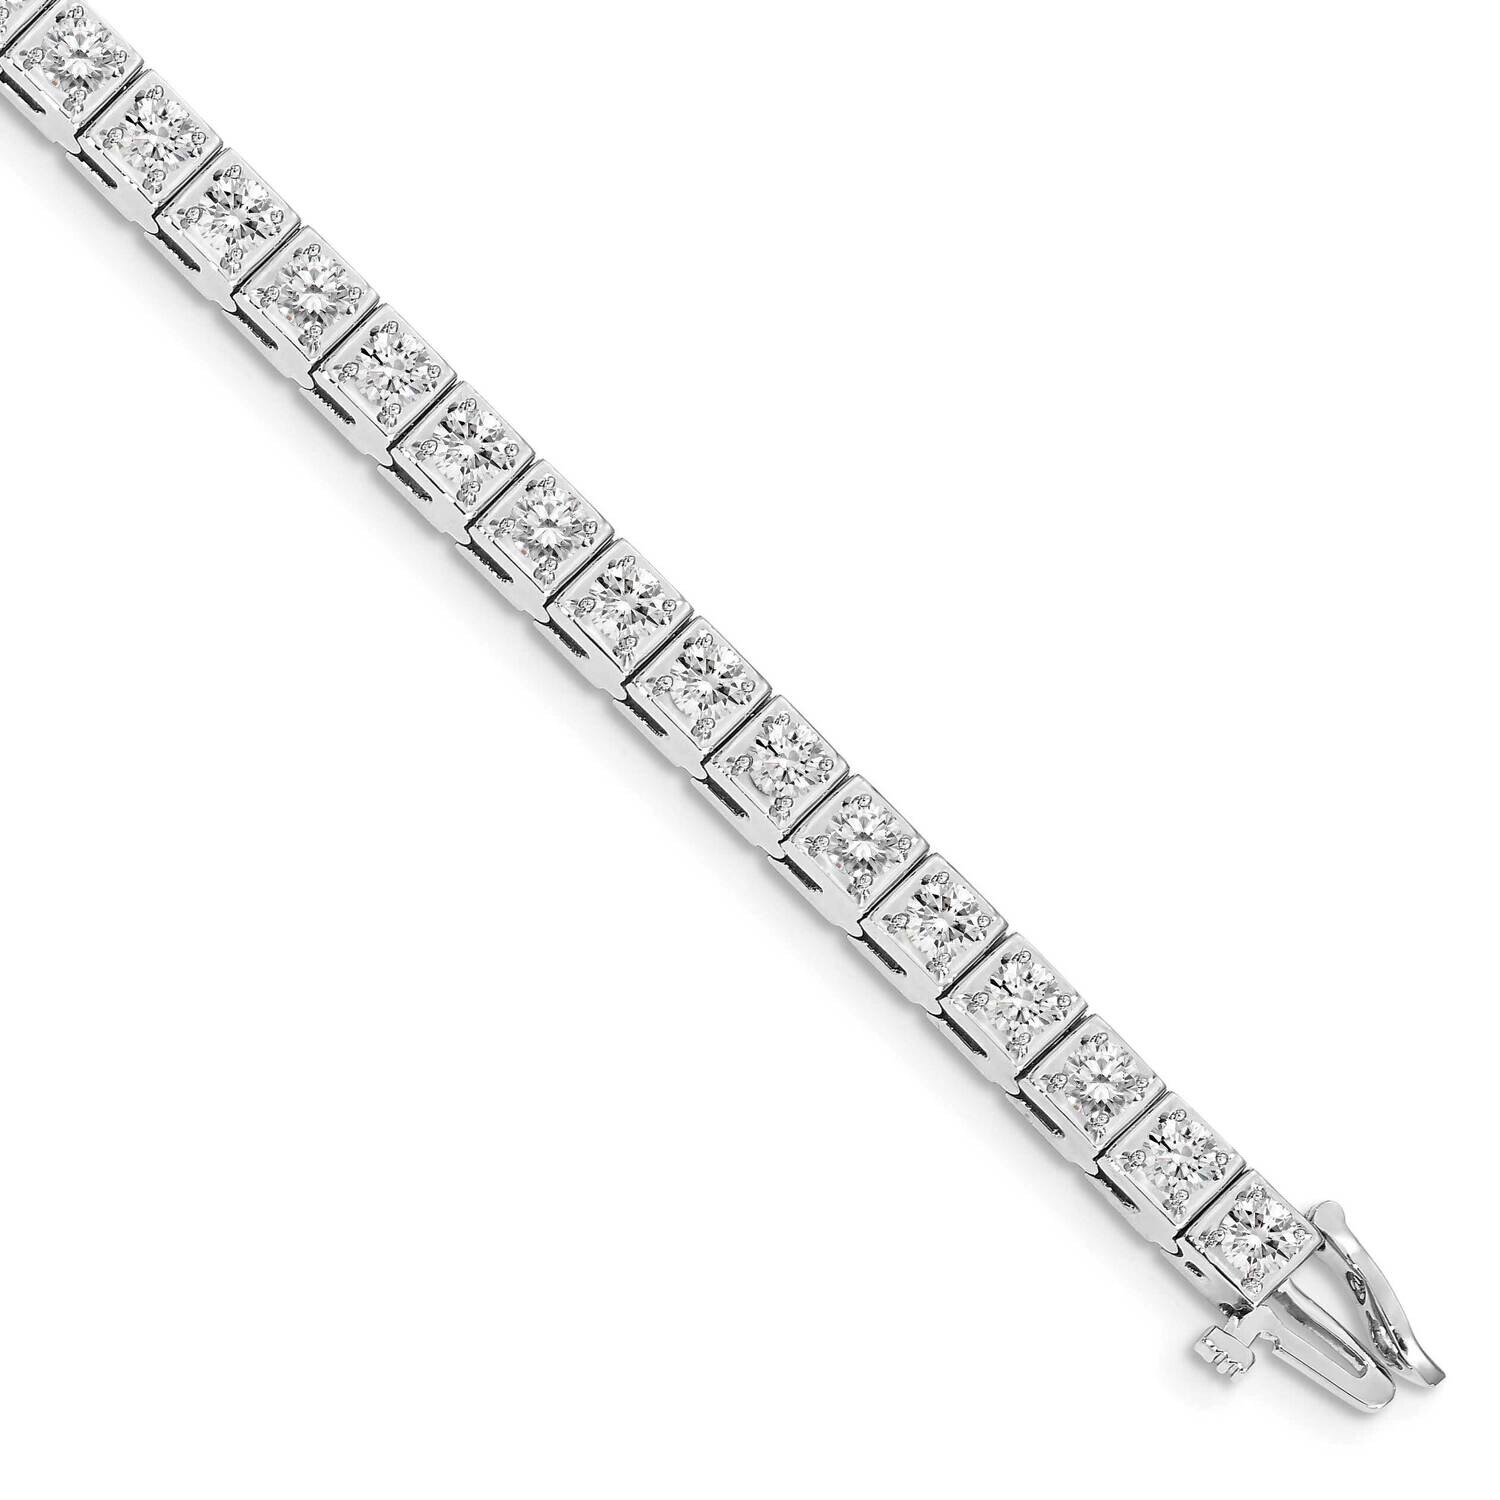 Holds 34 3.4mm Stones 5.1ct Square Link Tennis Bracelet Mounting 14k White Gold X2164W